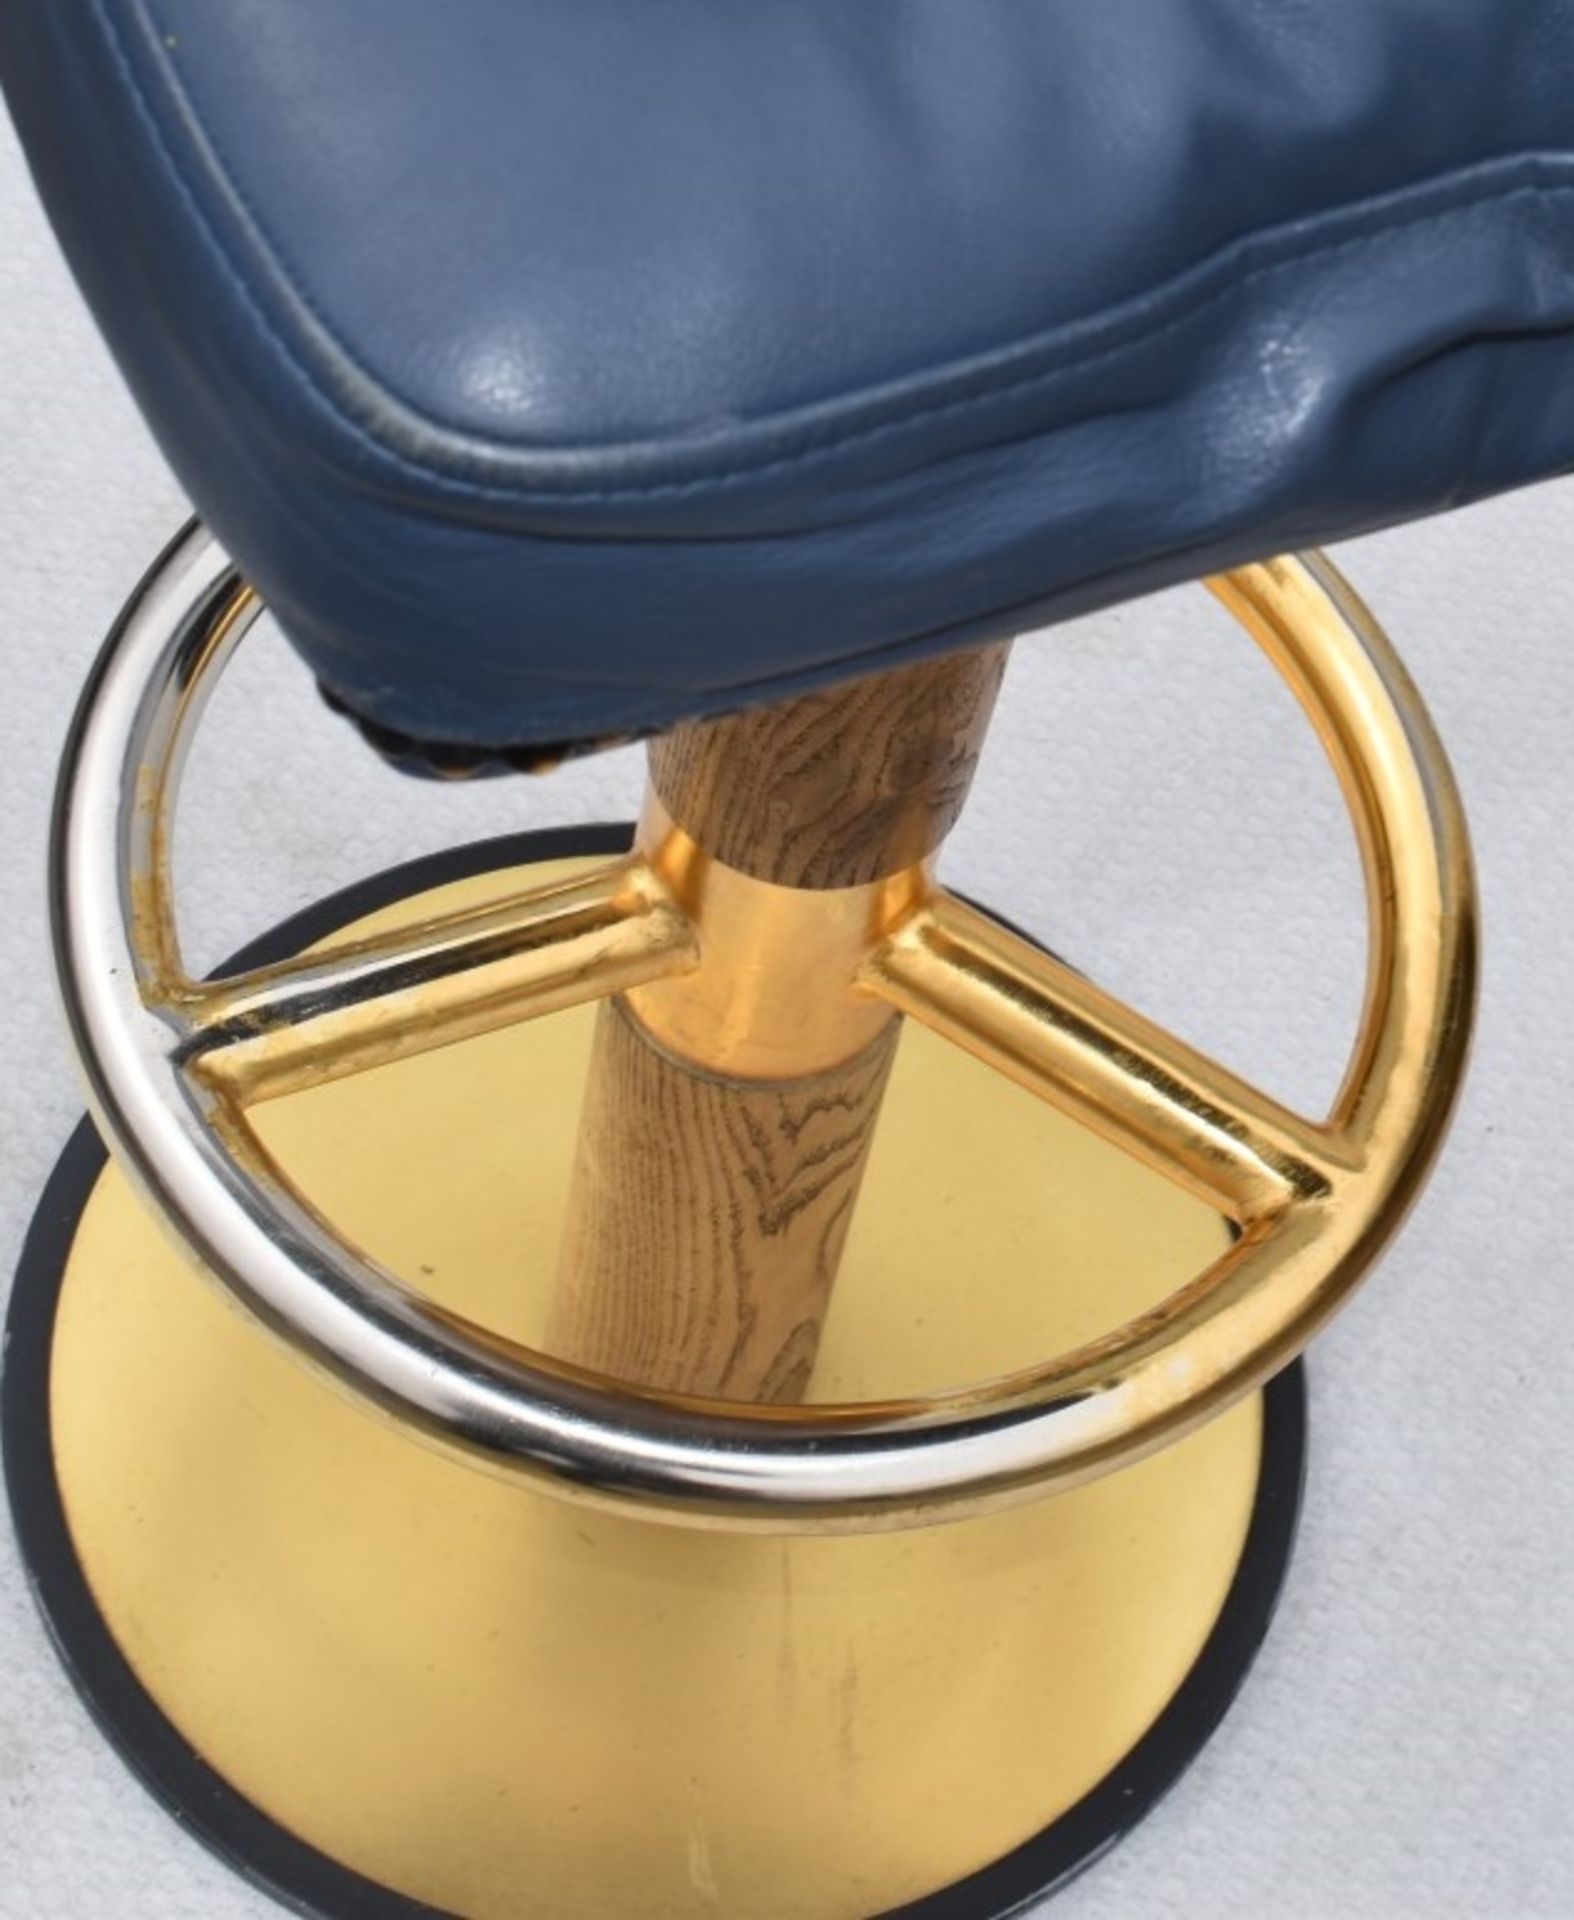 1 x Luxury Buttoned Bar Stool with Wooden Frame, Metal Base, Footrest and Studded Upholstery in a - Image 6 of 8